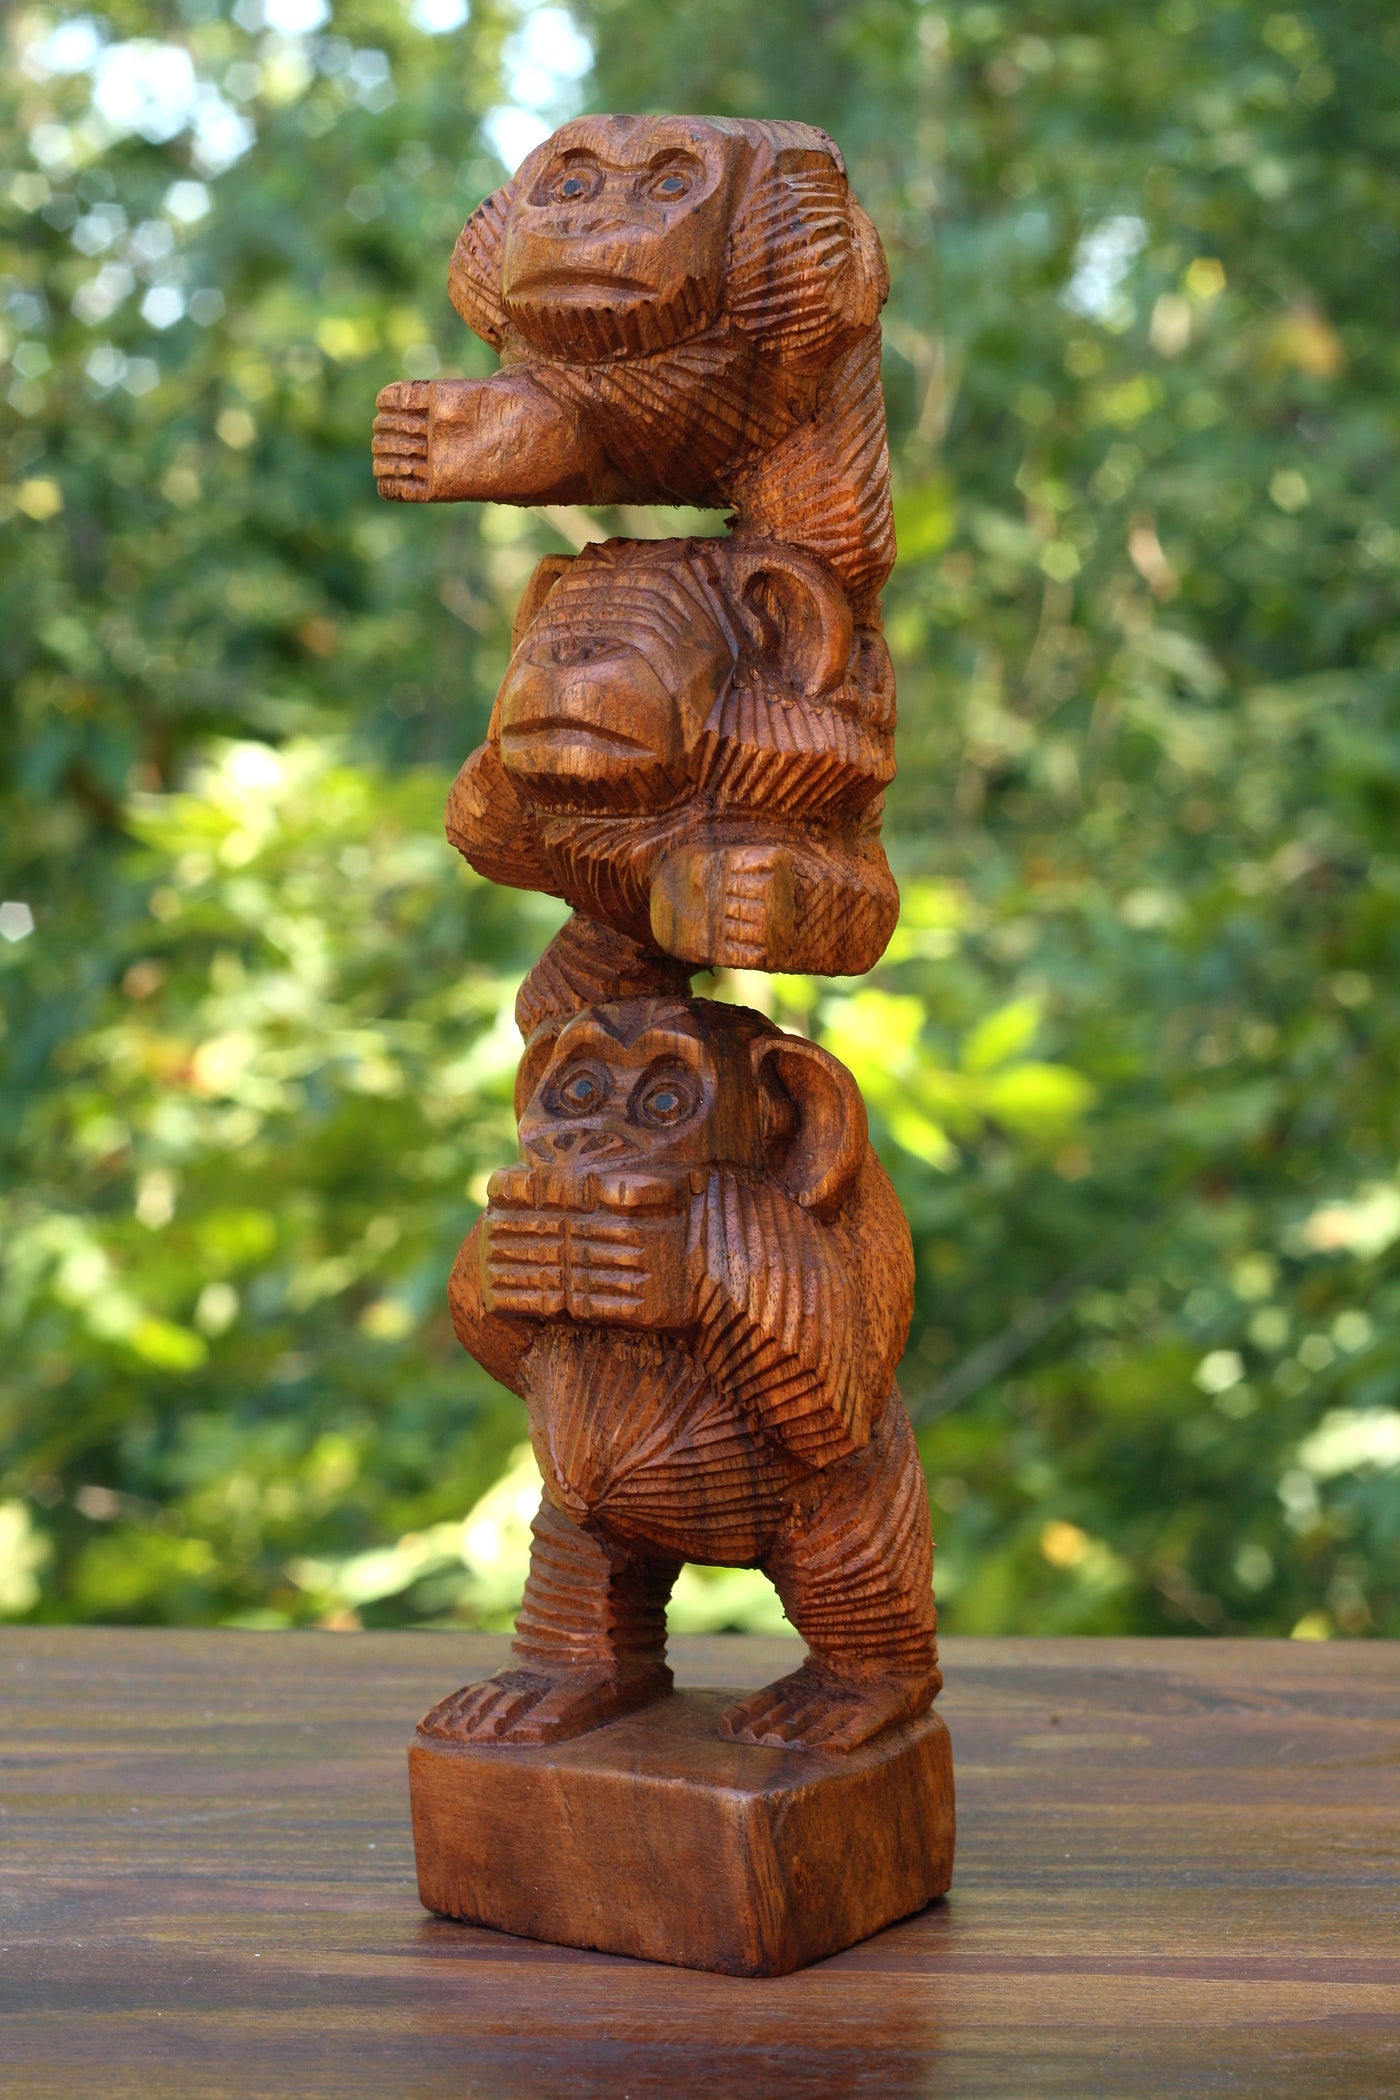 Wooden Hand Carved Stacked 3 Monkeys See, Hear, Speak No Evil Figurines Handmade Sculpture Home Decor Accent Handcrafted Wood Three Monkeys Statue